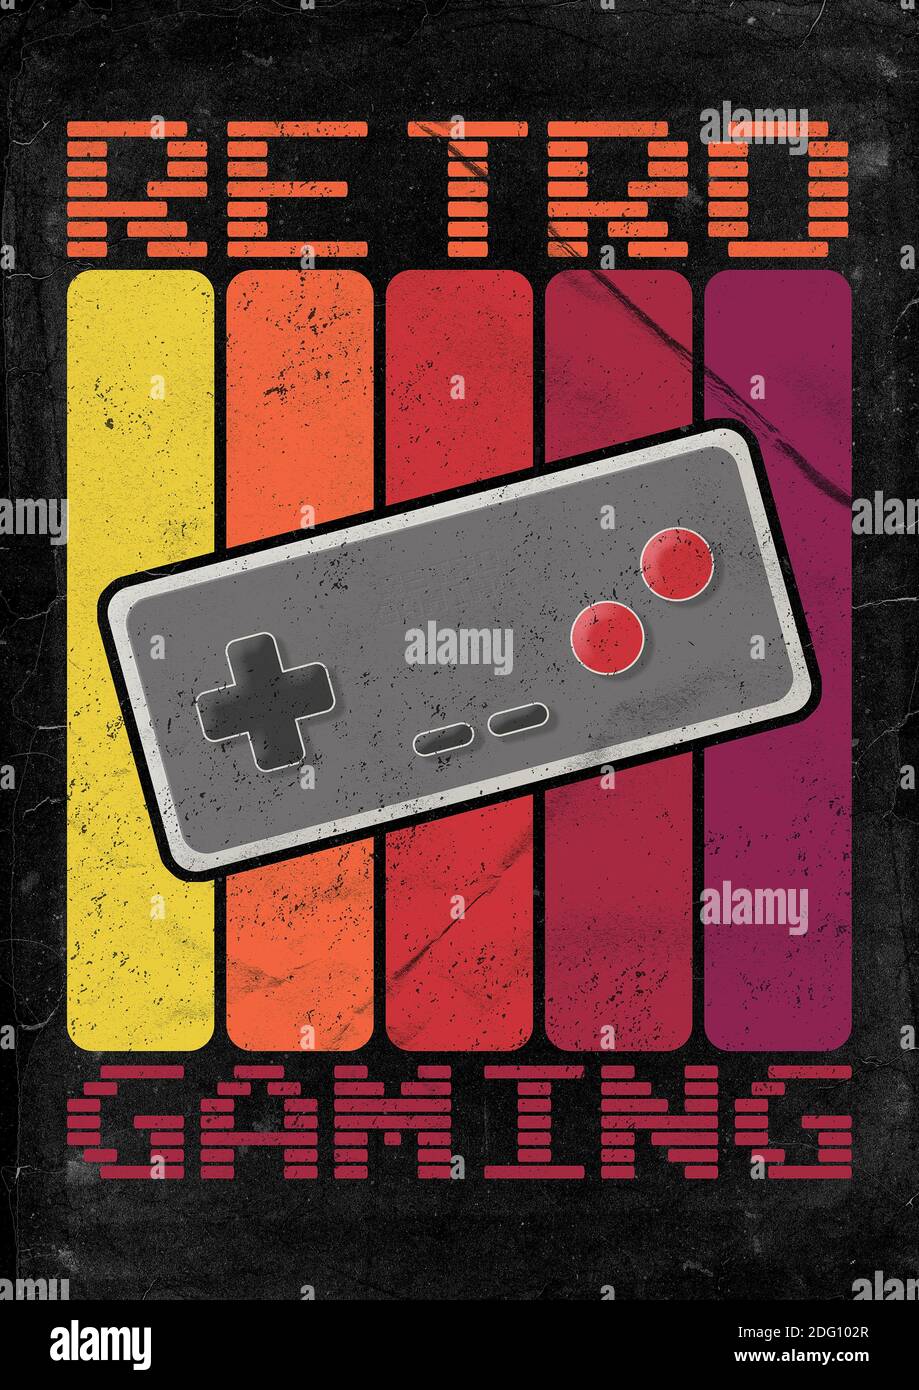 A RETRO GAMING graphic design illustration in a 1980's or 1990's style with colored stripes and generic gaming controller in the center Stock Photo